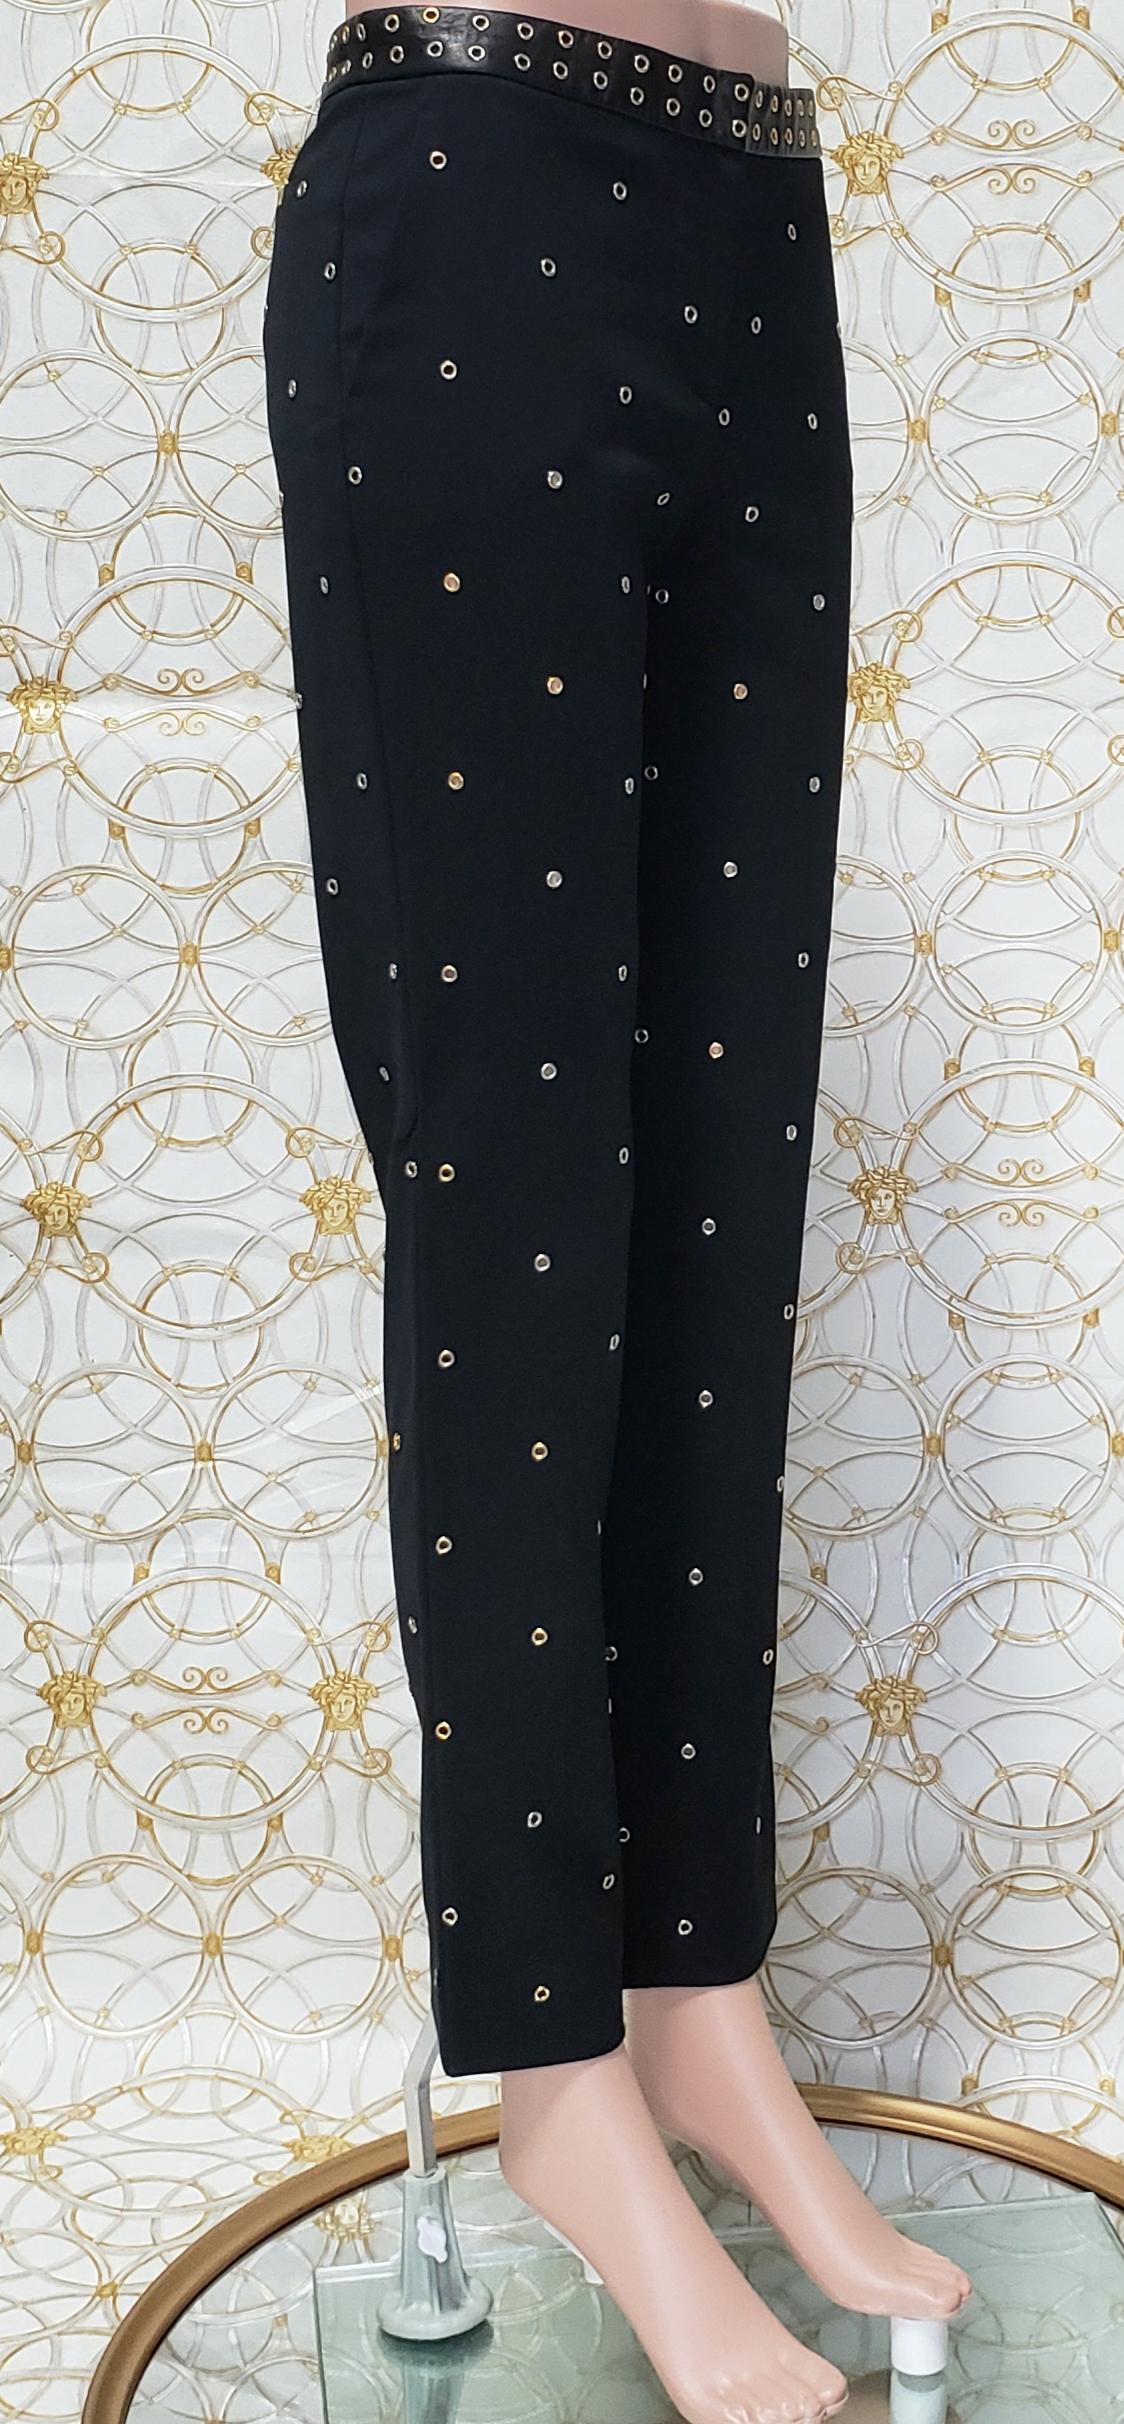 Black Resort 2012 Look # 5 VERSACE BLACK STRETCHY PANTS with RIVETS size 38 - 2 For Sale